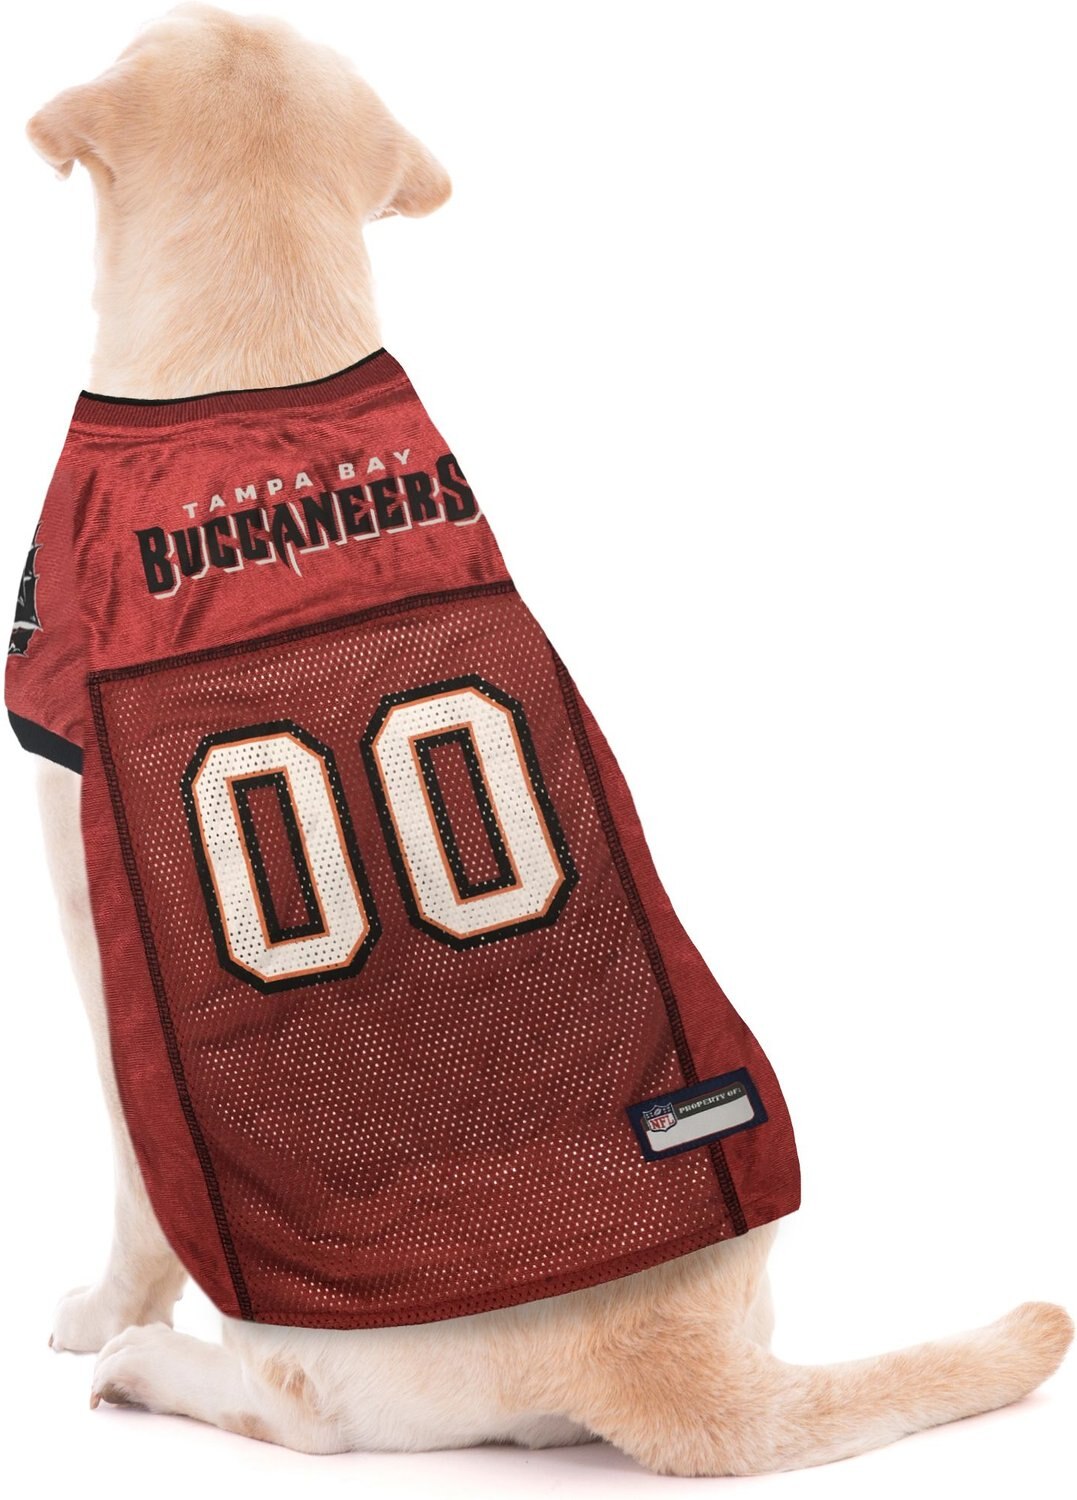 PETS FIRST NFL Dog Jersey, Tampa Bay Buccaneers, Medium